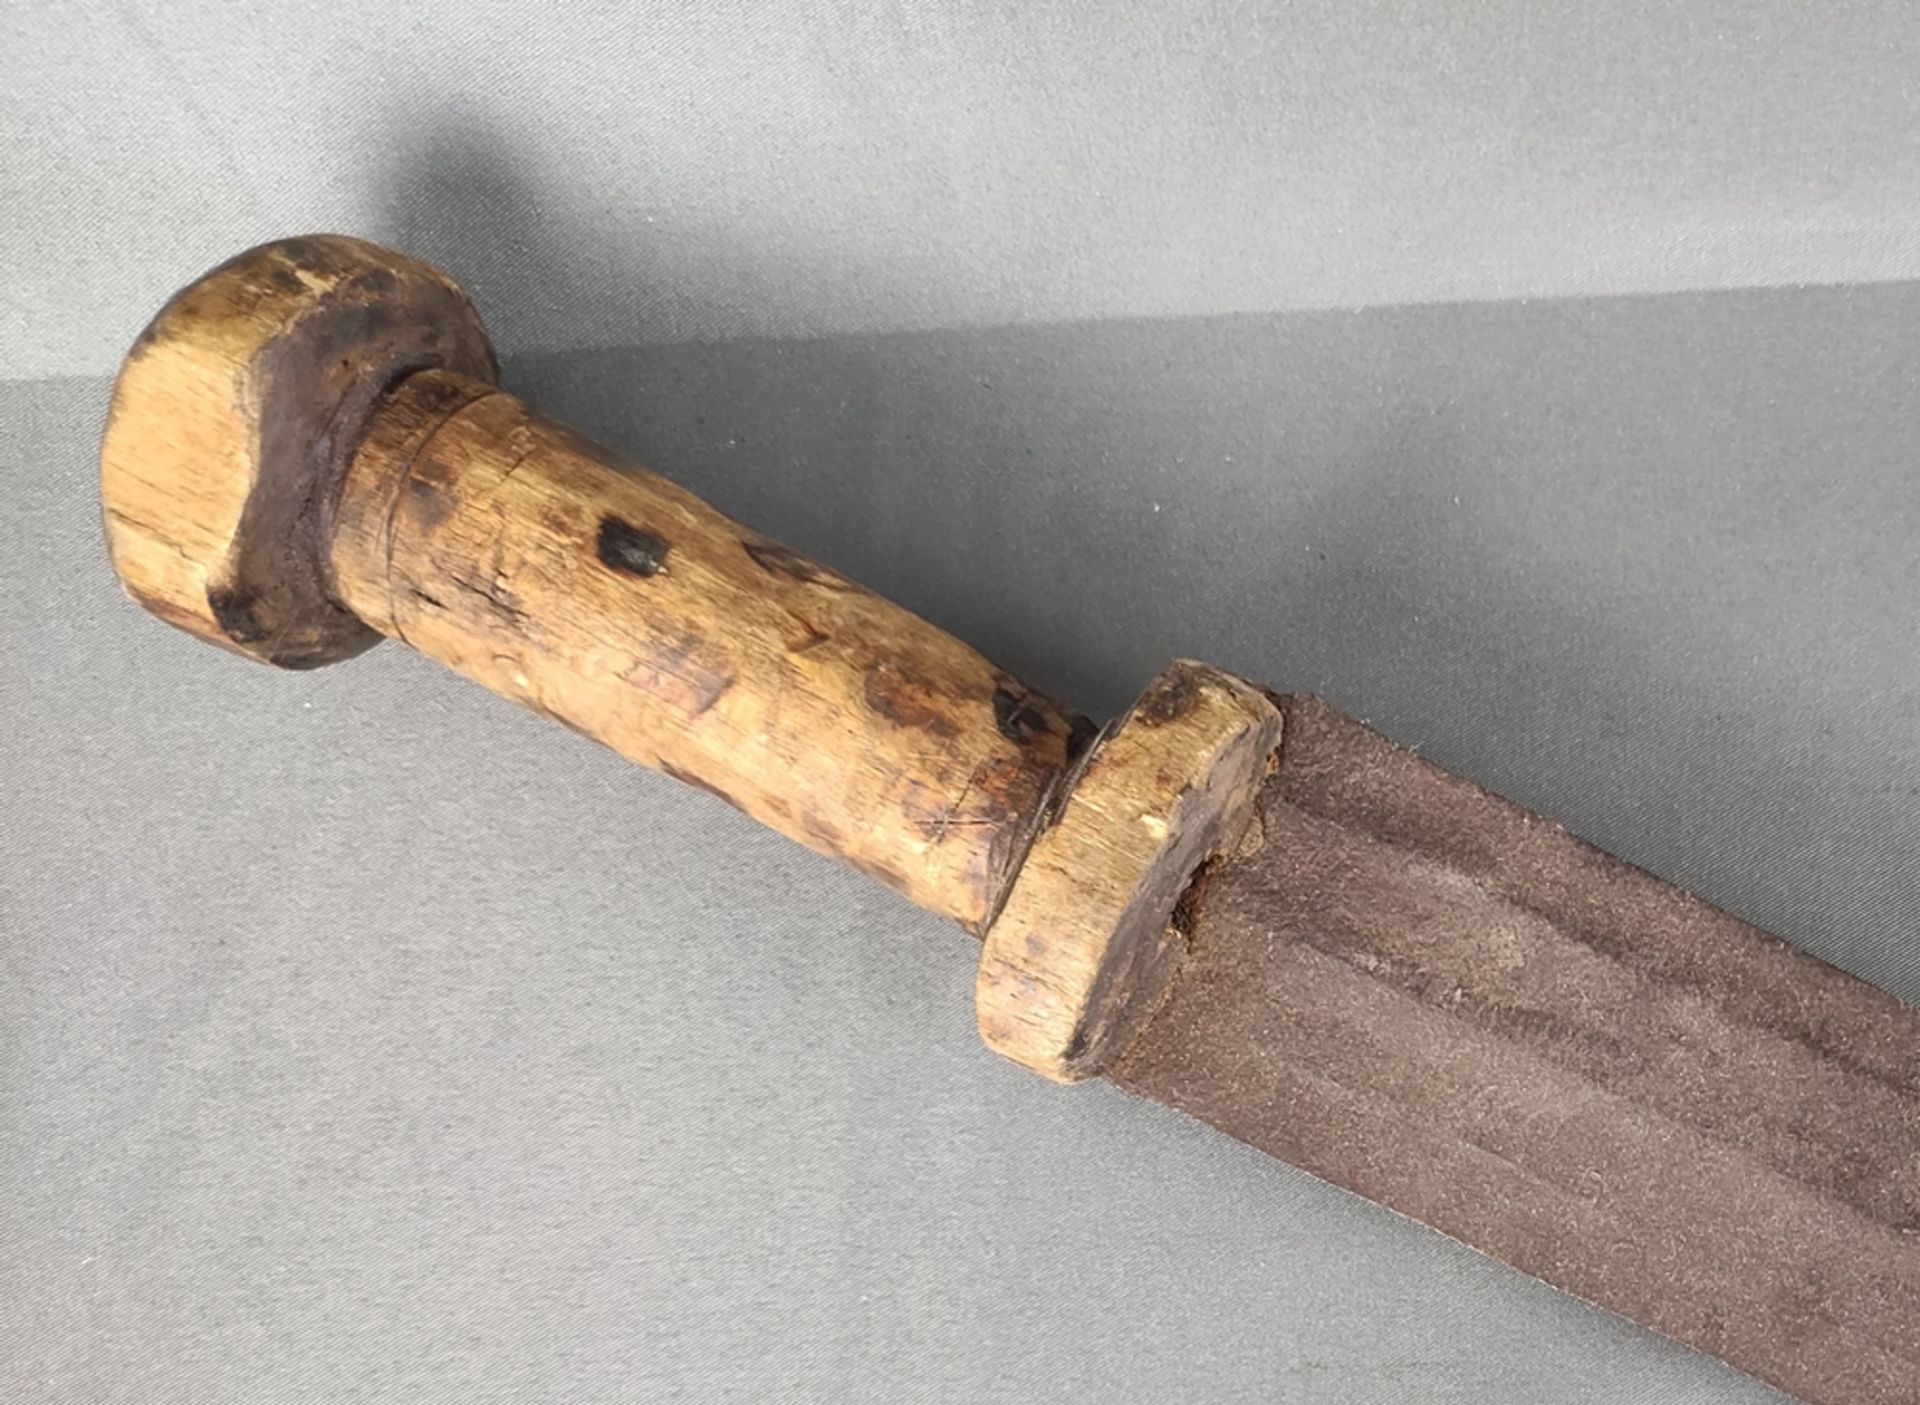 Konda sword, symmetrical sword with half-moon end, double-edged, wooden handle, probably used as - Image 3 of 4